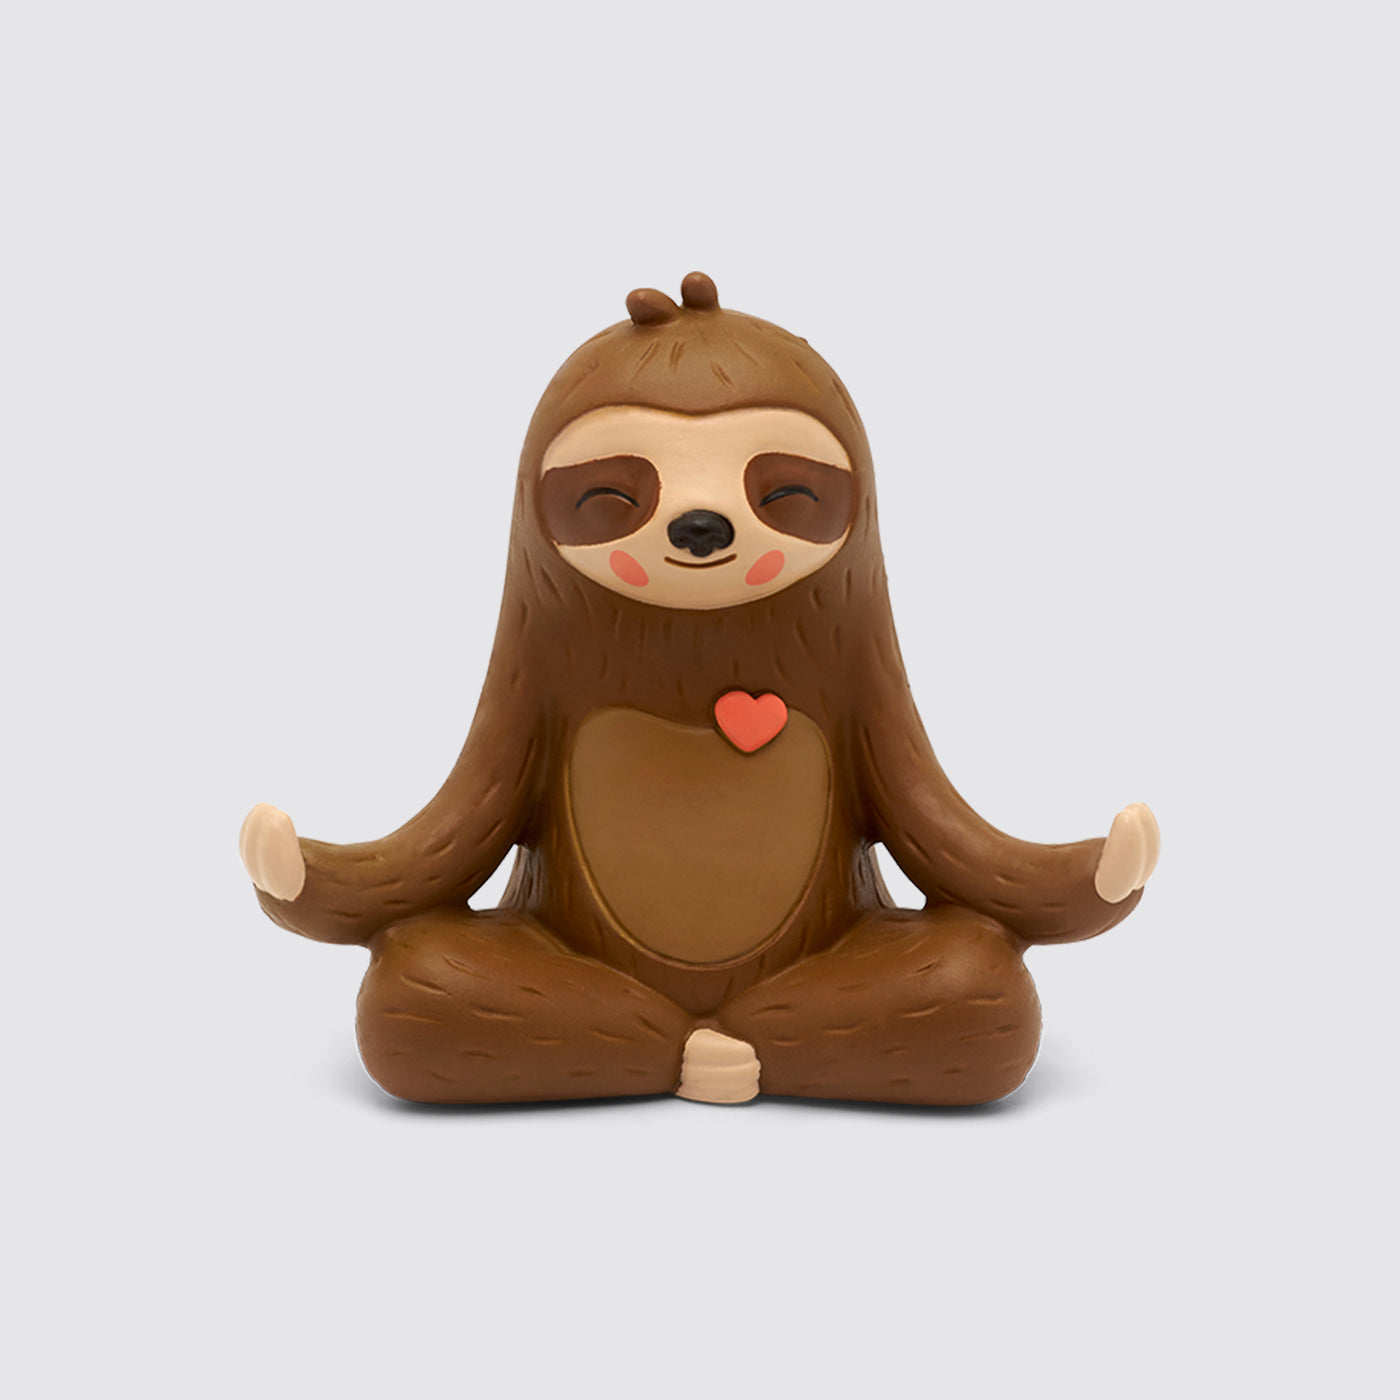 Tonies Audio Play Character: Relaxation and Routines - Mindfulness